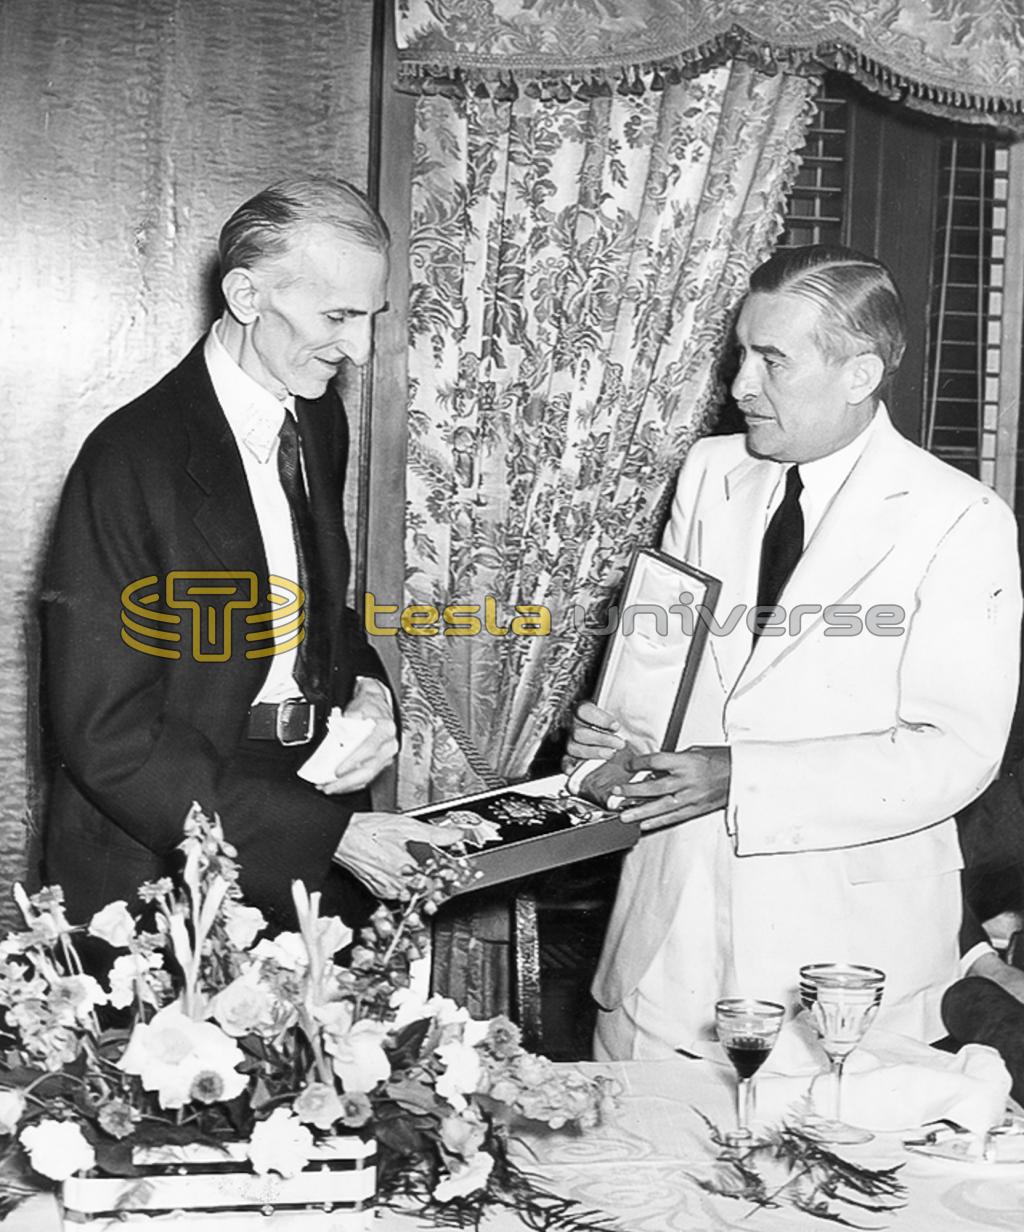 Nikola Tesla being presented with the Order of the White Lion